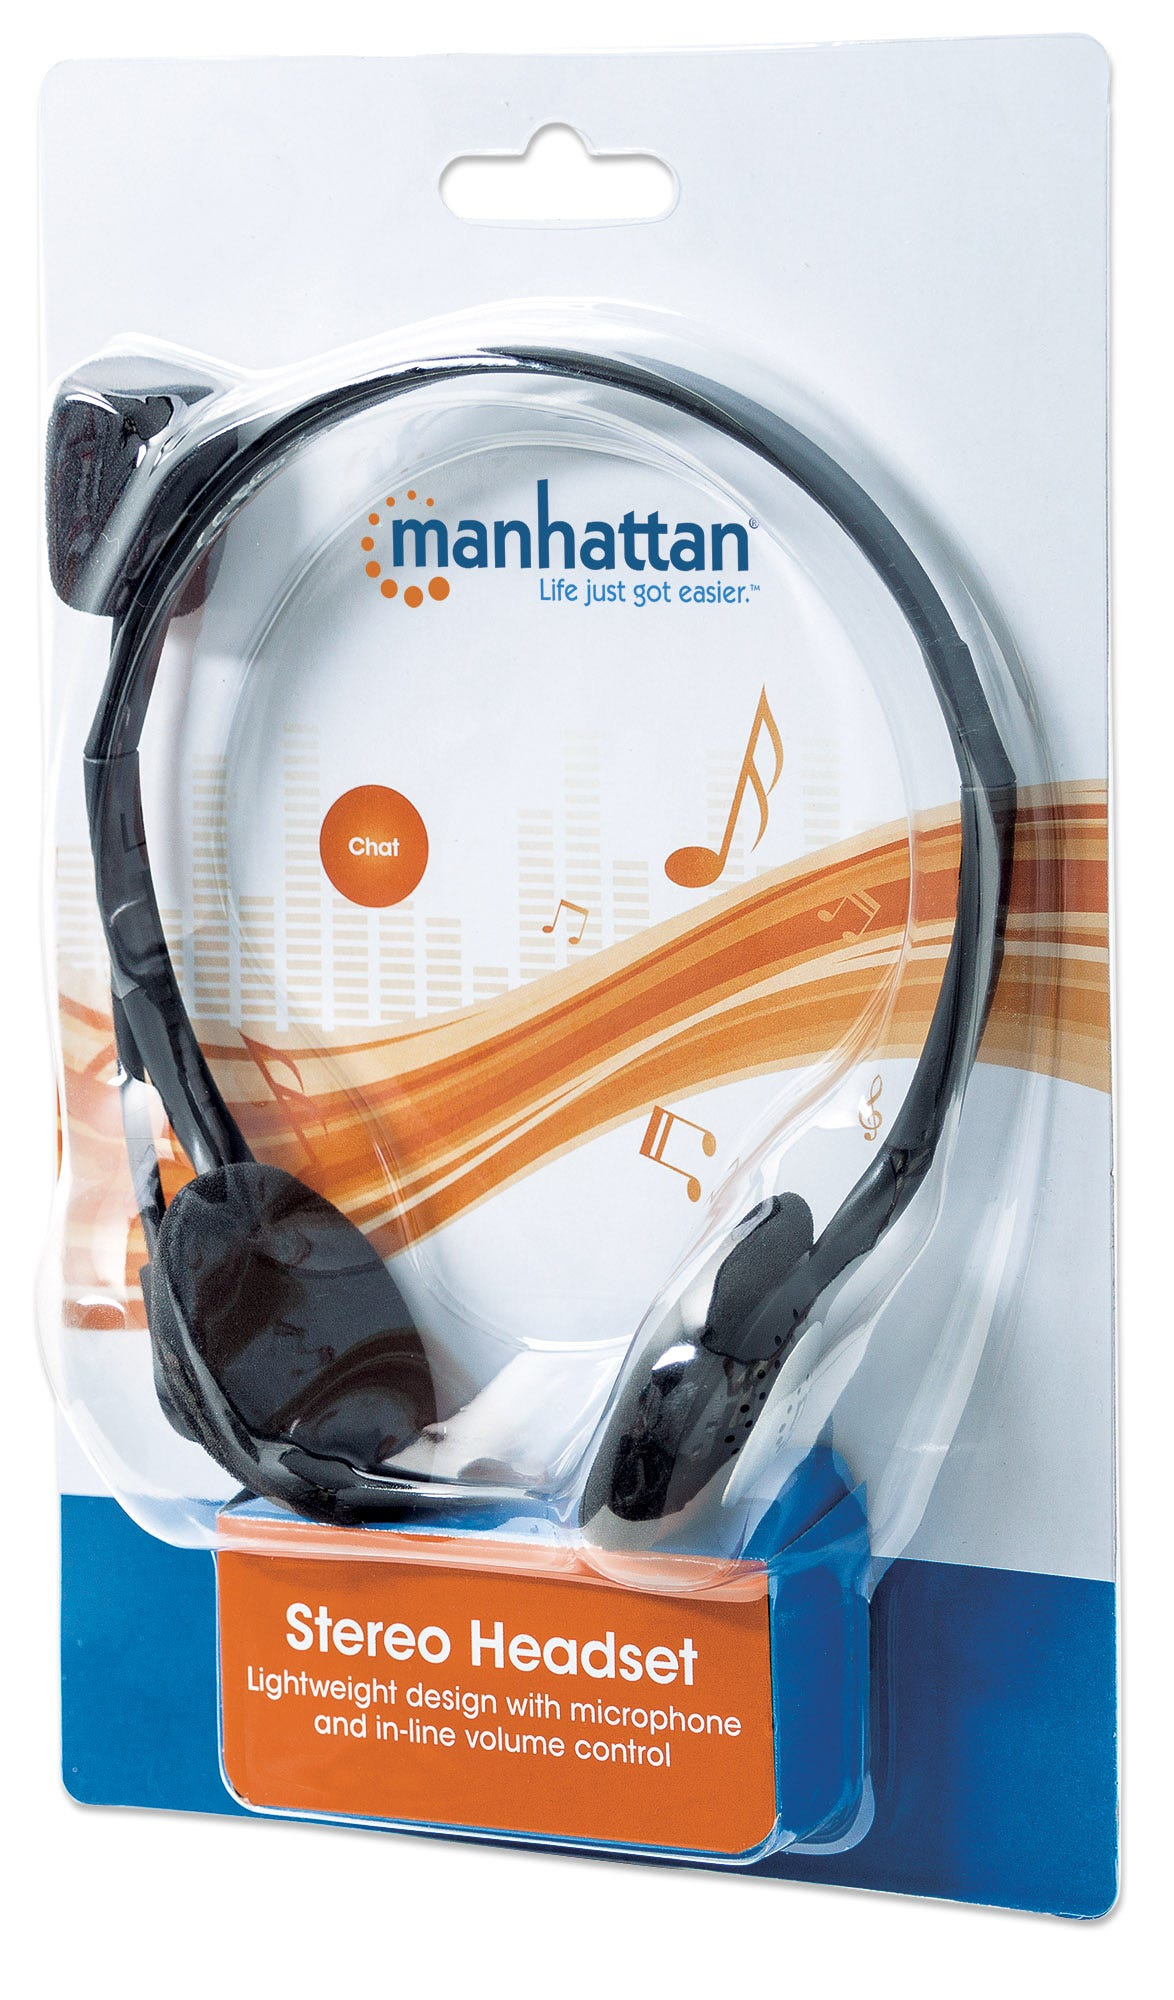 Manhattan Stereo Headset, Lightweight, Adjustable Microphone, In-Line Volume Control, Foam Earpads, 2x 3.5mm stereo jacks/plugs, cable 2m, Black, Three Year Warranty, Blister